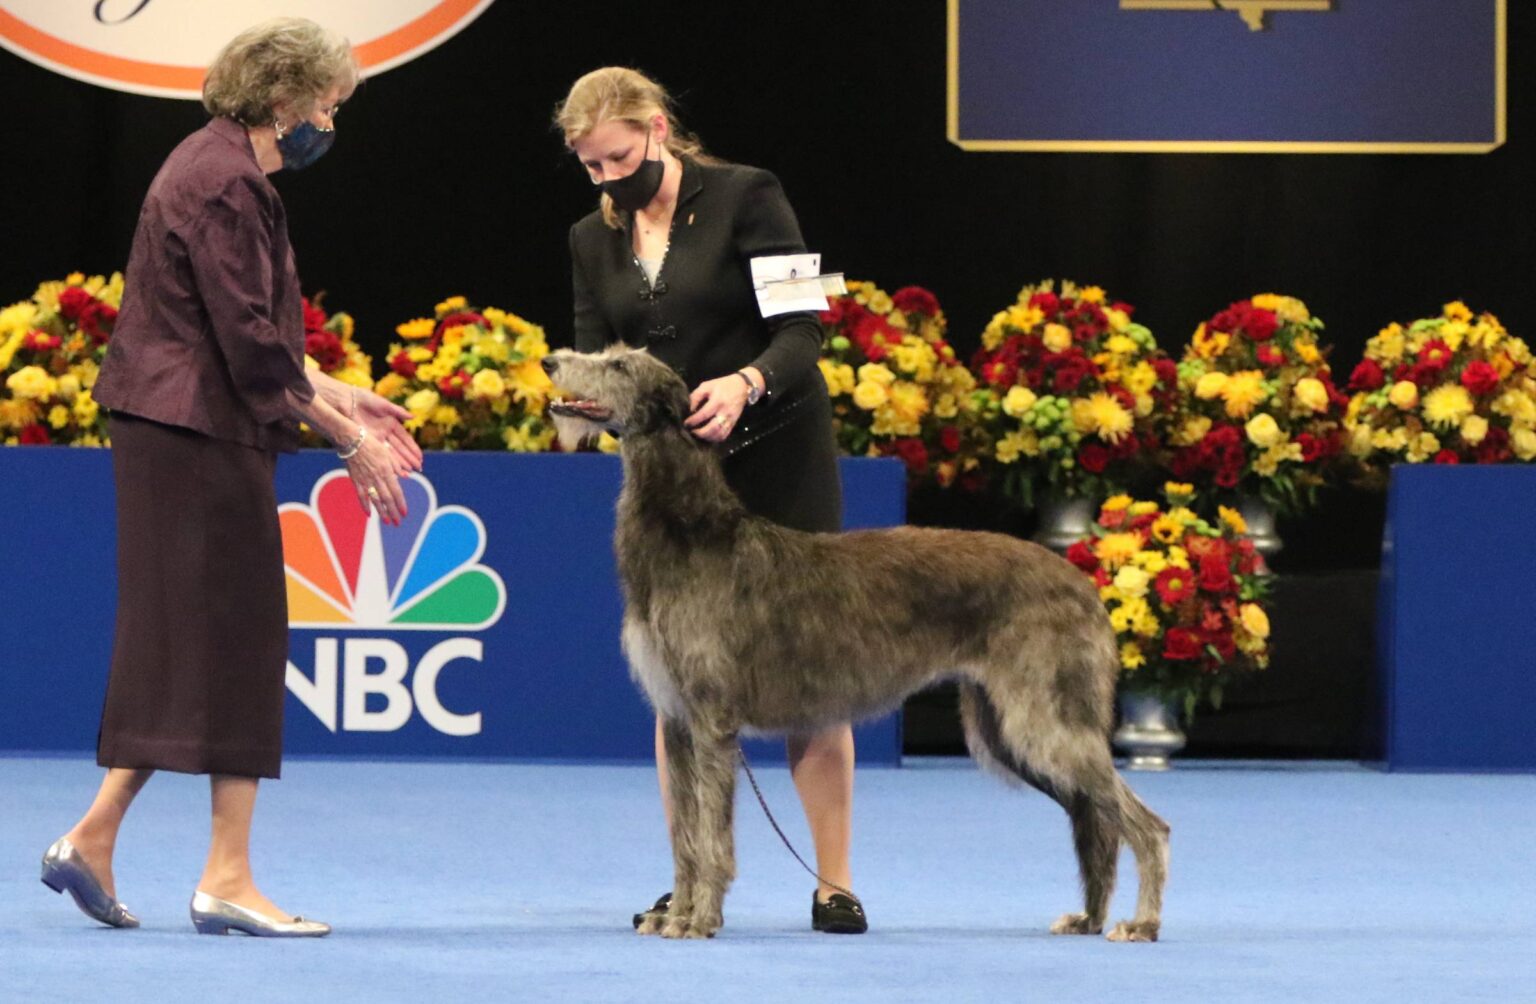 The National Dog Show had an incredible selection of winners this year. Here are the best dogs in show for the 2020 competition.